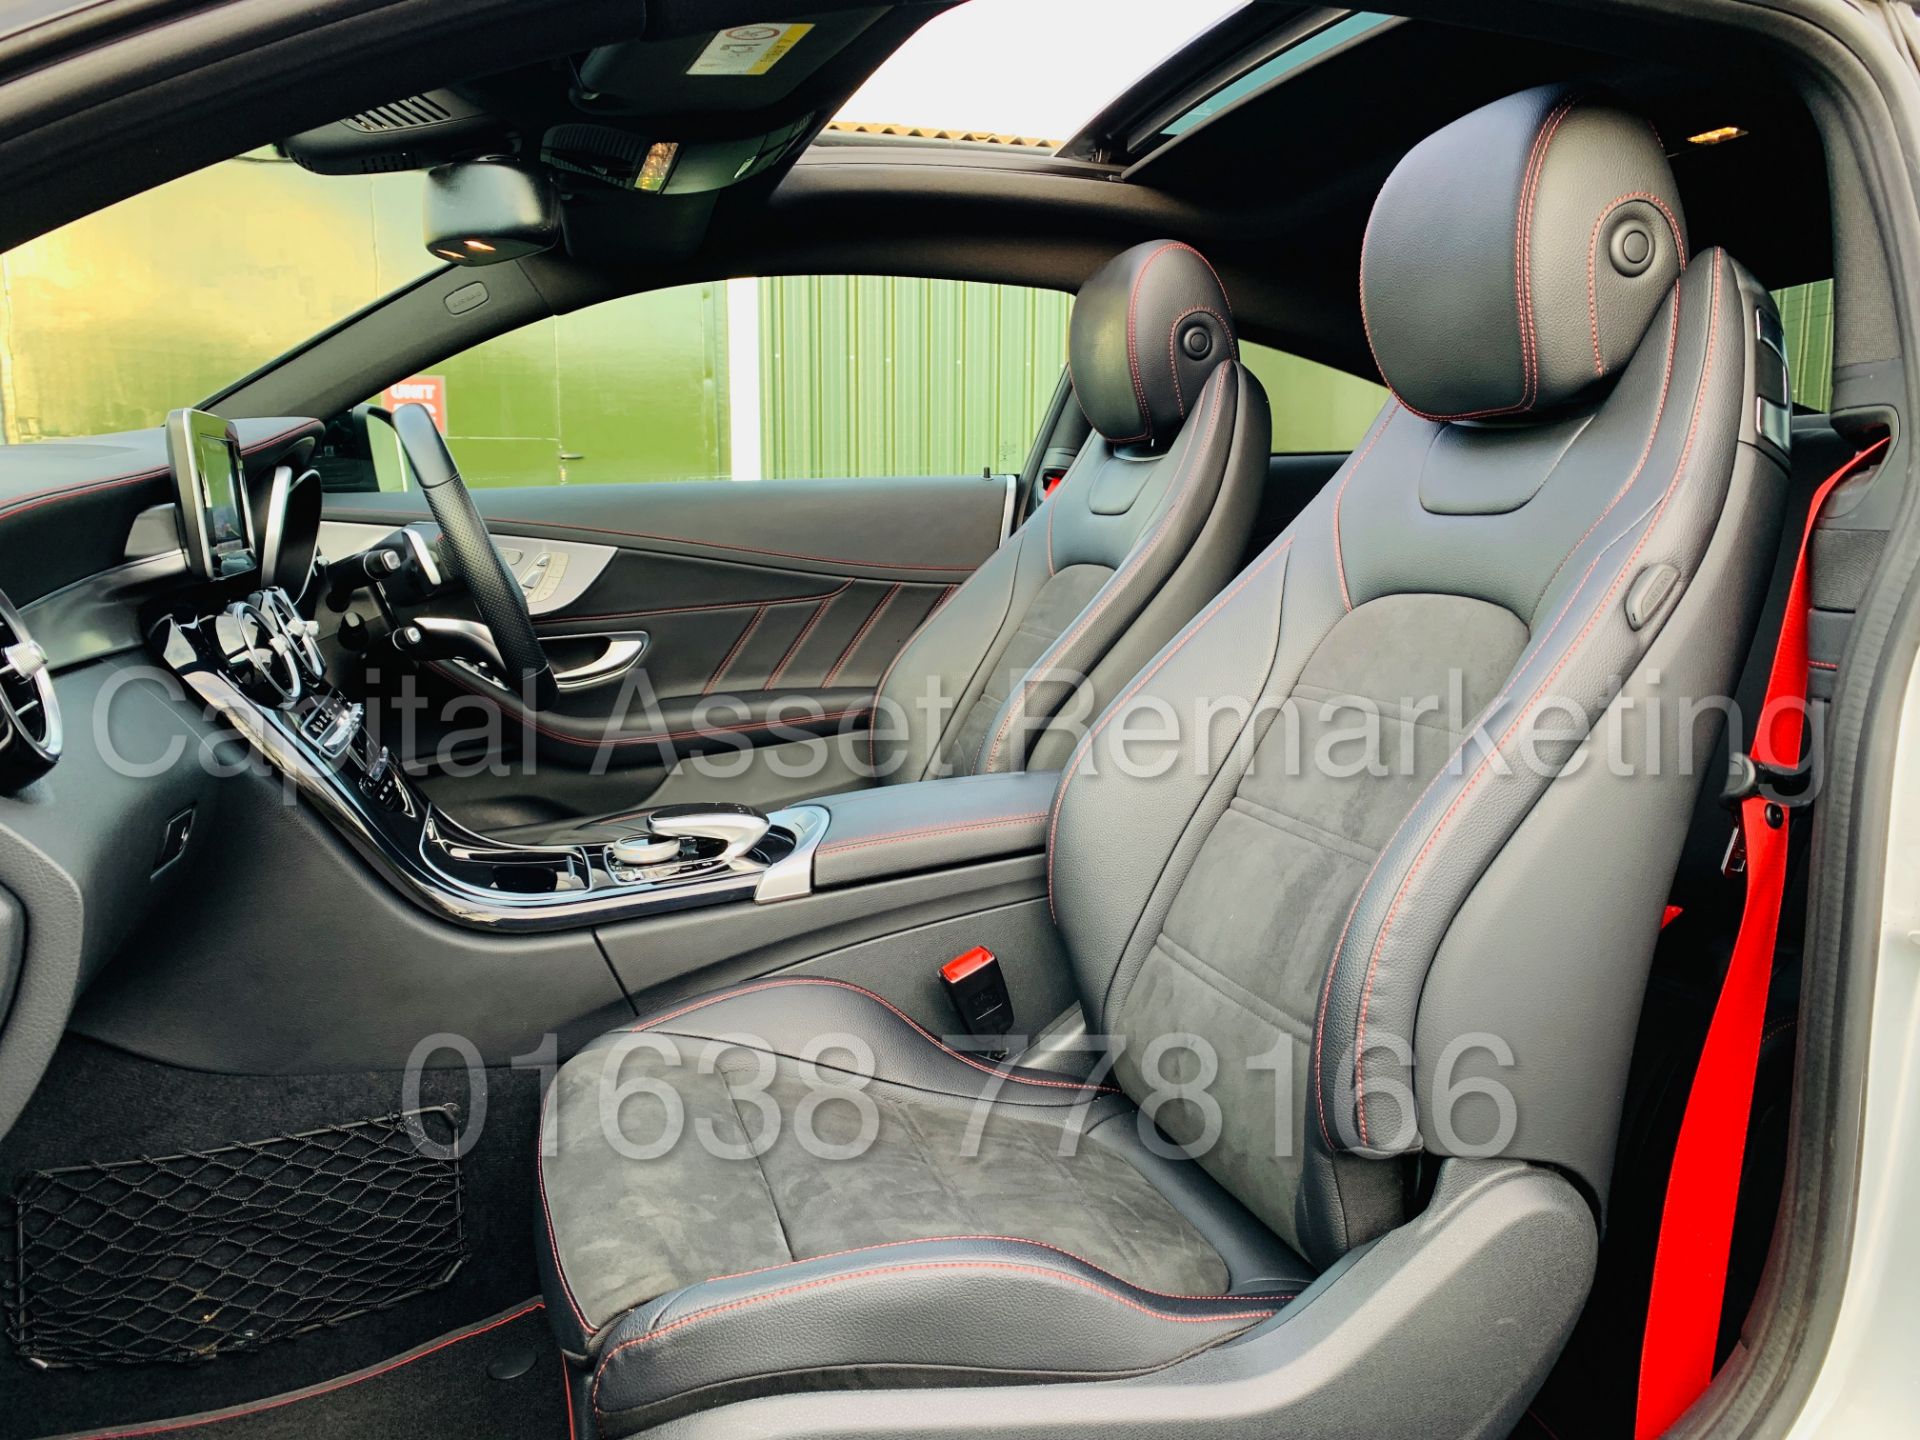 MERCEDES-BENZ C43 AMG *PREMIUM 4 MATIC* COUPE (2017) '9-G AUTO - LEATHER - SAT NAV' **FULLY LOADED** - Image 36 of 67